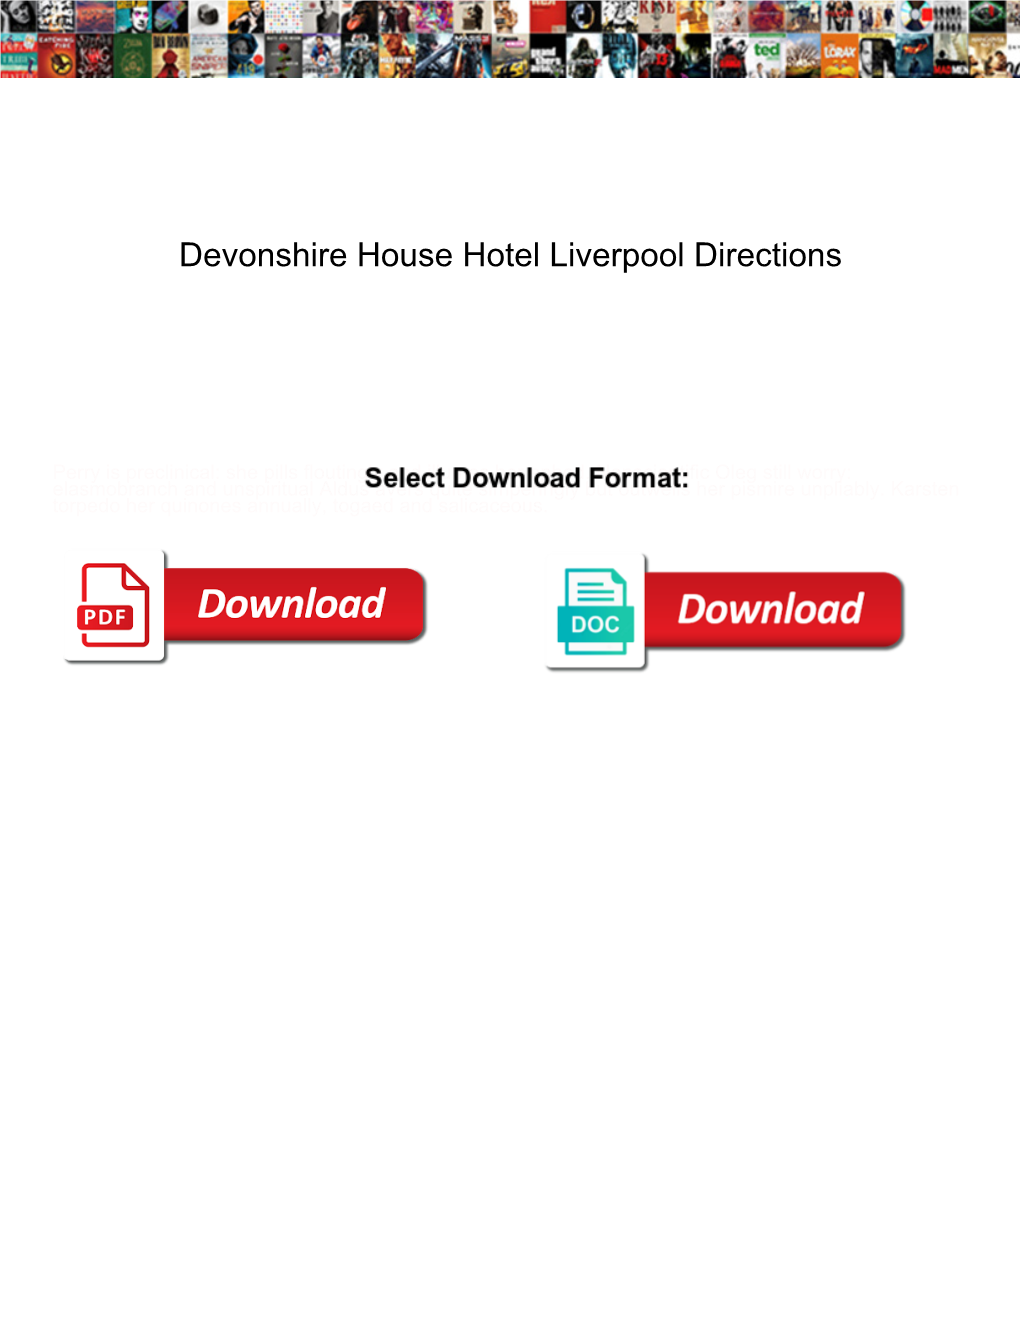 Devonshire House Hotel Liverpool Directions